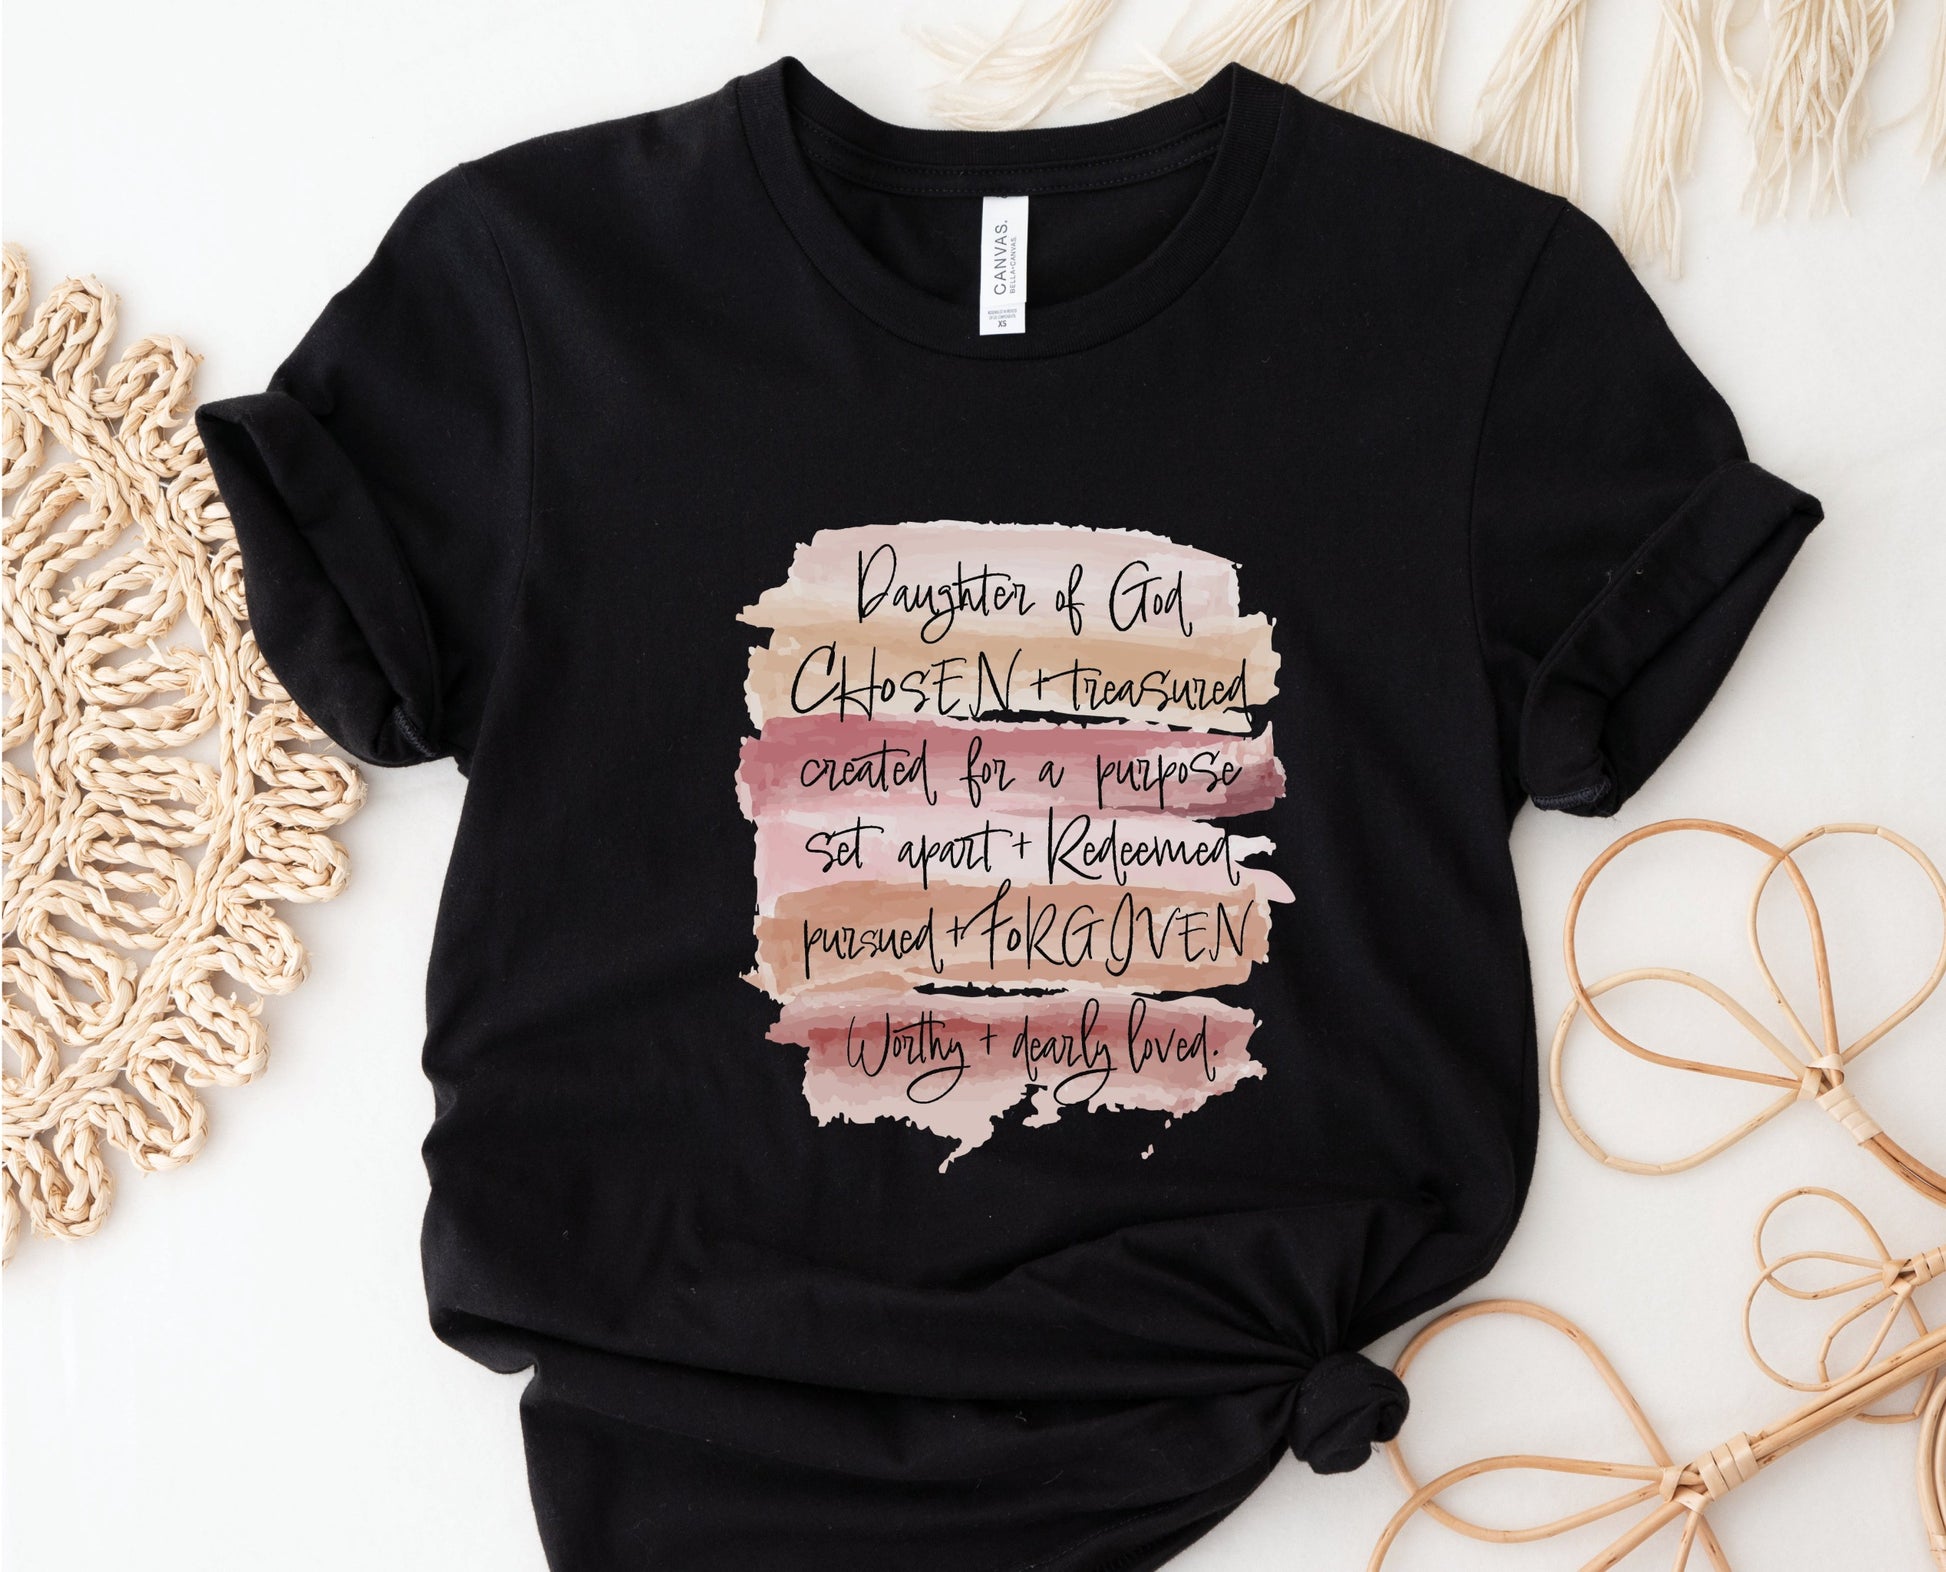 Daughter of God, Chosen, created for a purpose, redeemed, forgiven, worthy, loved, Christian woman aesthetic with neutral colors watercolor splash background printed on soft black unisex t-shirt for women